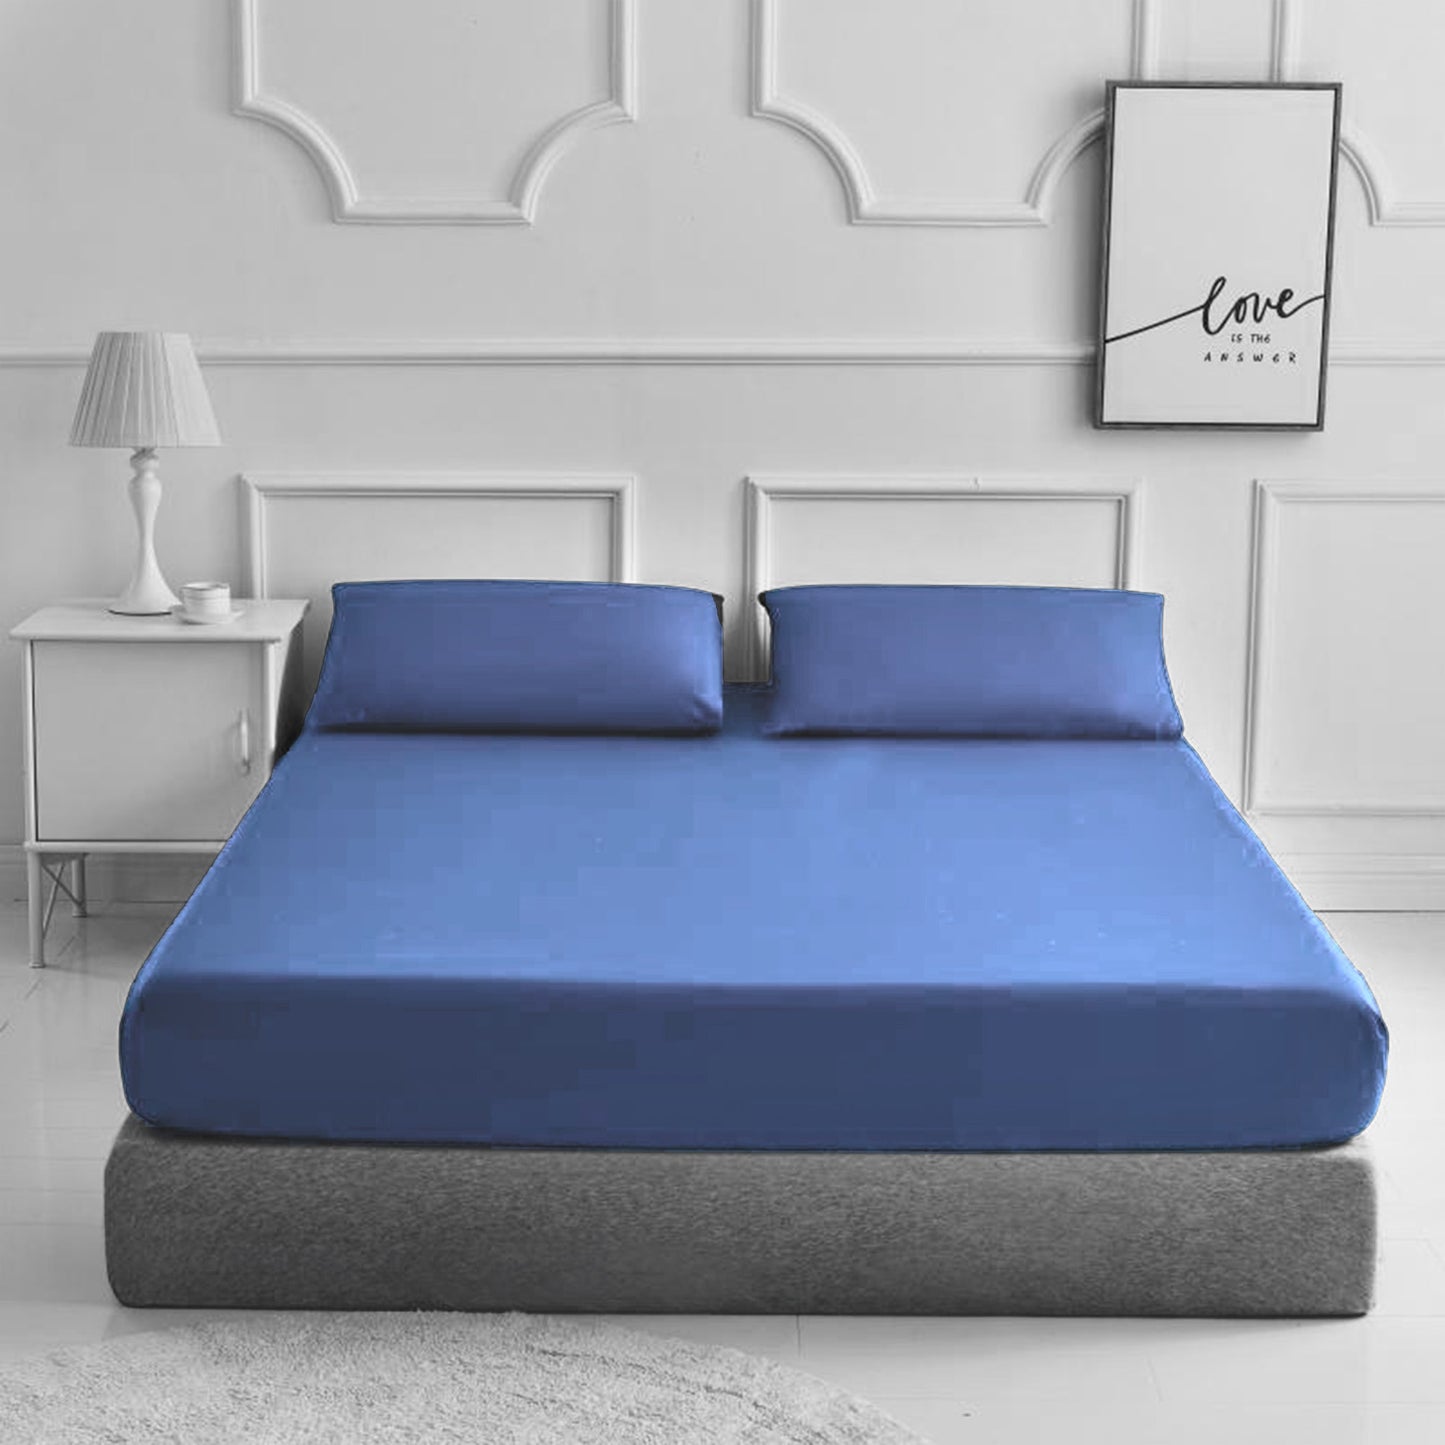 Fitted Bed Sheet Matching FREE 2 X PILLOW CASE Plain Dyed - TheComfortshop.co.ukBed Sheets0721718963660thecomfortshopTheComfortshop.co.ukPC FIT FREE PP Mid Blue KingMid BlueKingFitted Bed Sheet Matching FREE 2 X PILLOW CASE Plain Dyed - TheComfortshop.co.uk